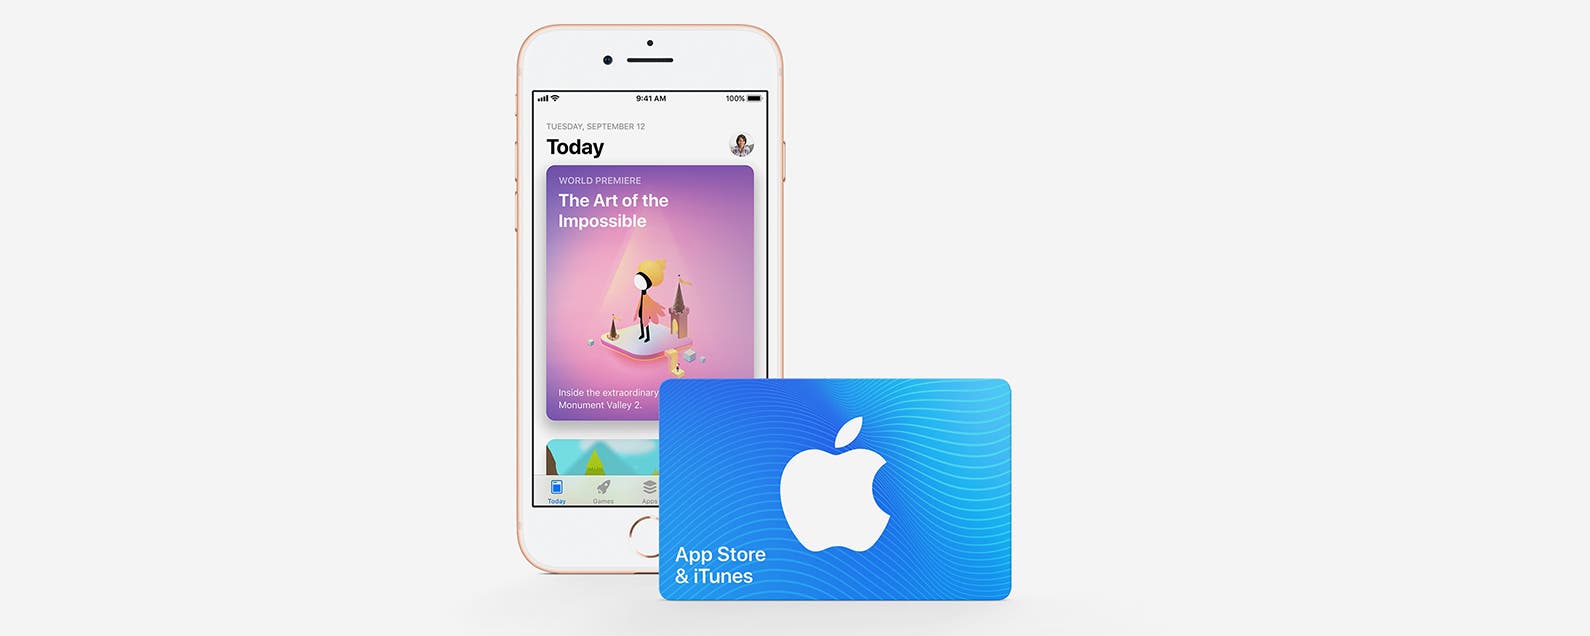 How To Use An Itunes Gift Card With Family Sharing 2019 - can you use a itunes gift card to buy robux